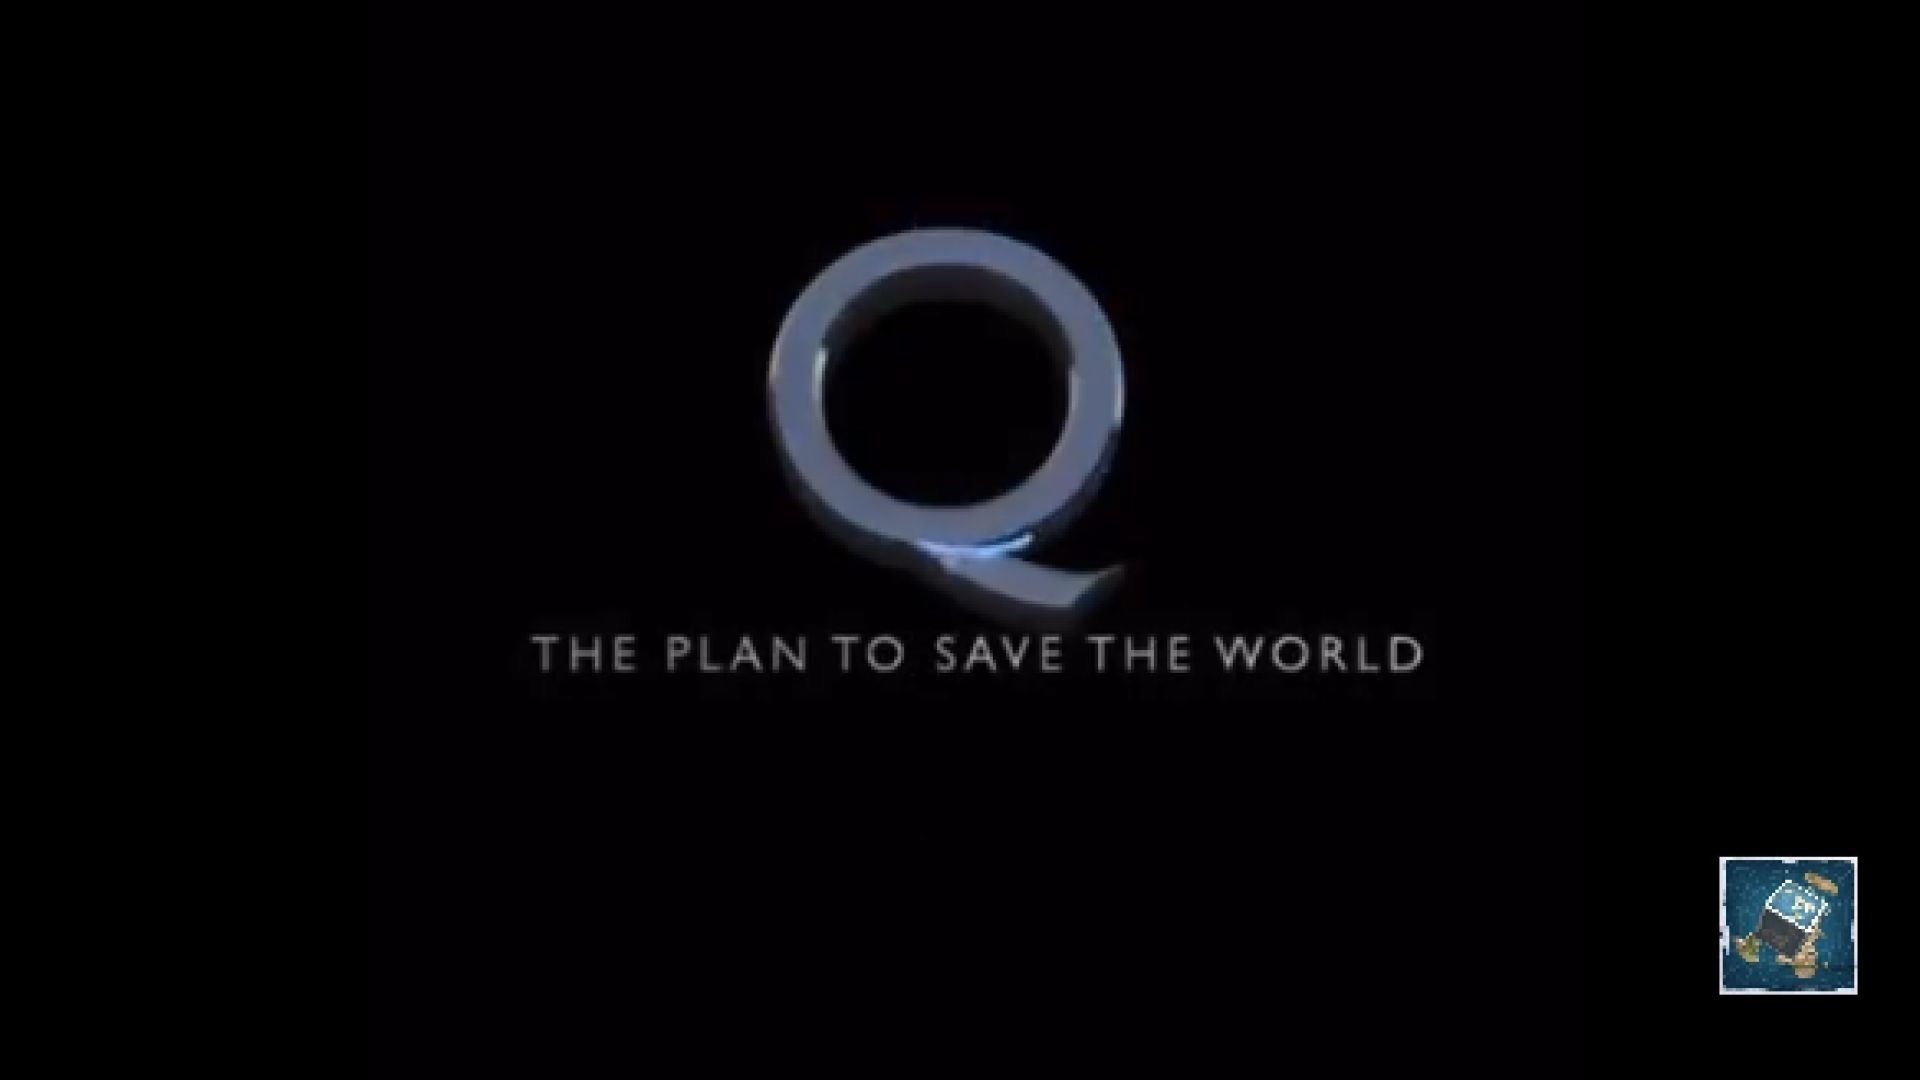 THE PLAN TO SAVE THE WORLD